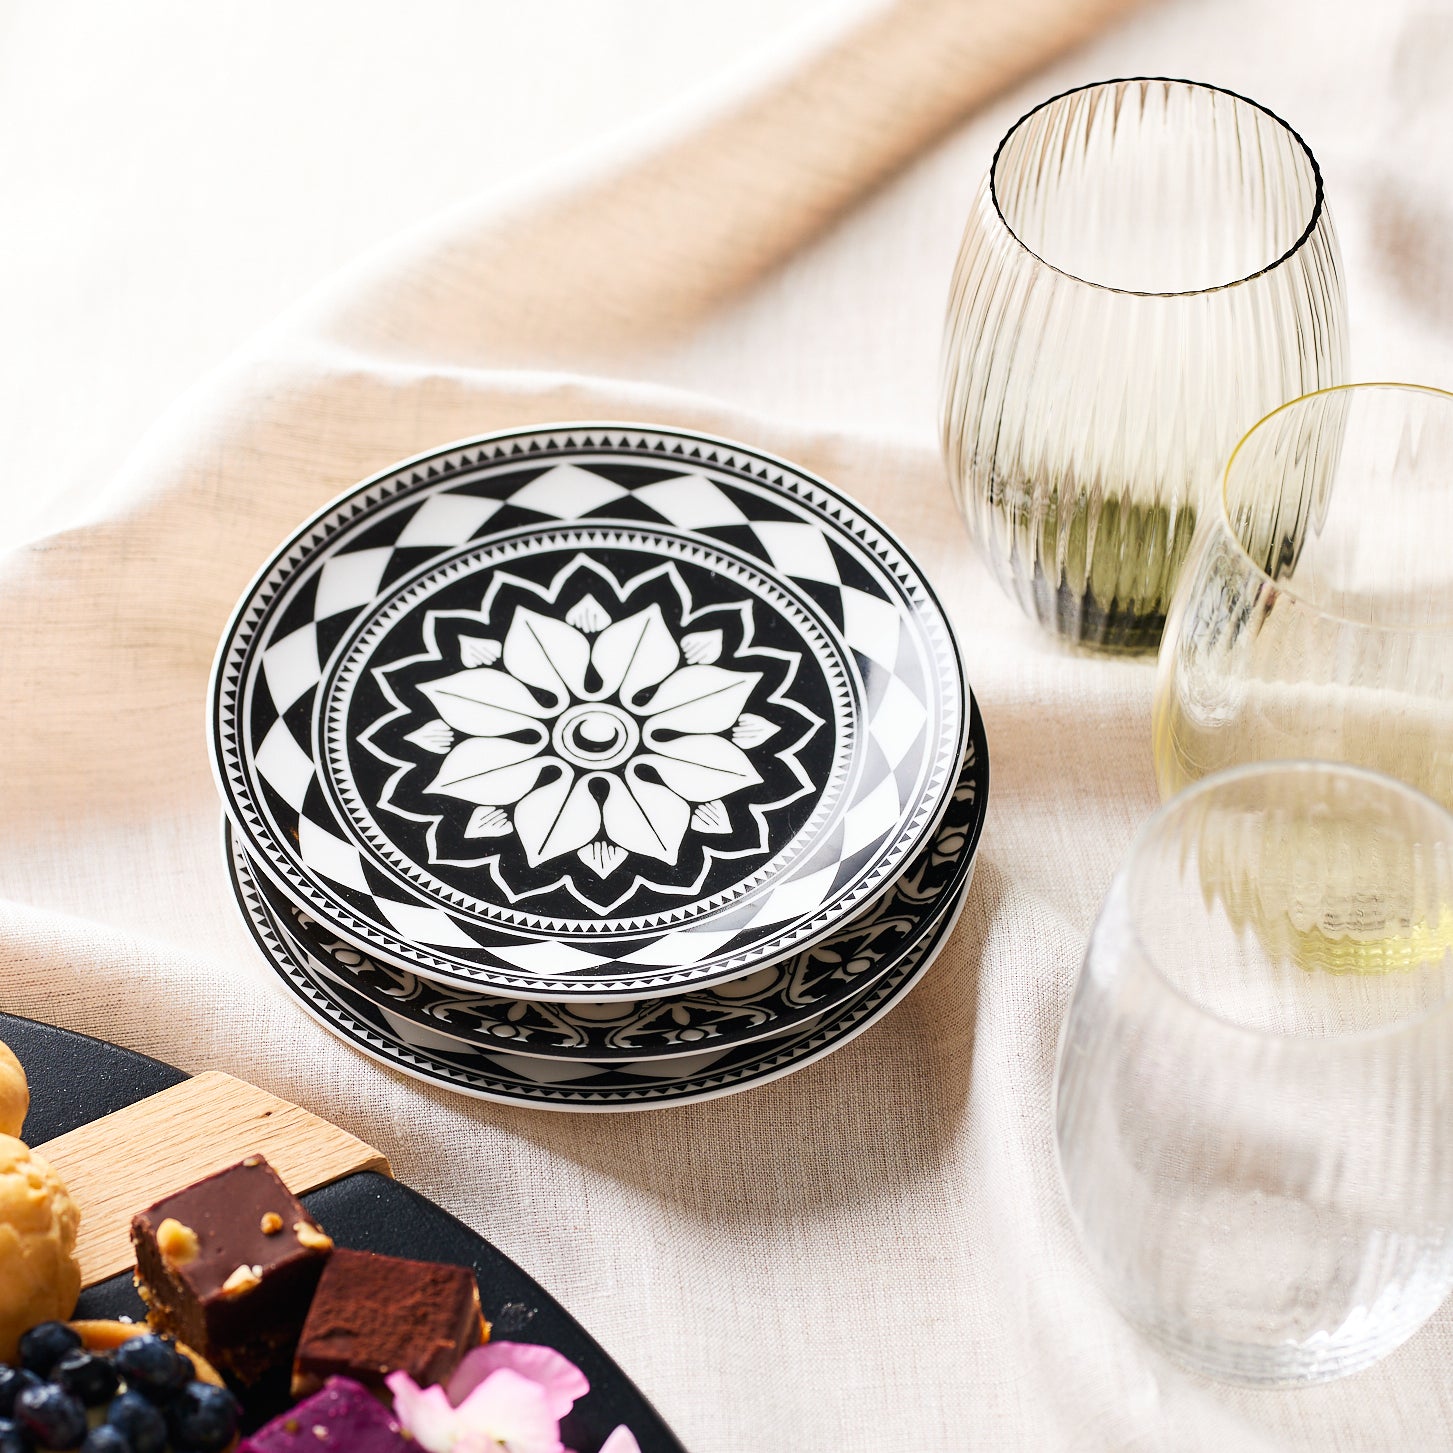 Four black and white decorative round Fez Small Plates by Caskata Artisanal Home, featuring bold geometrics and a Moroccan pattern, arranged with overlapping edges against a white background.